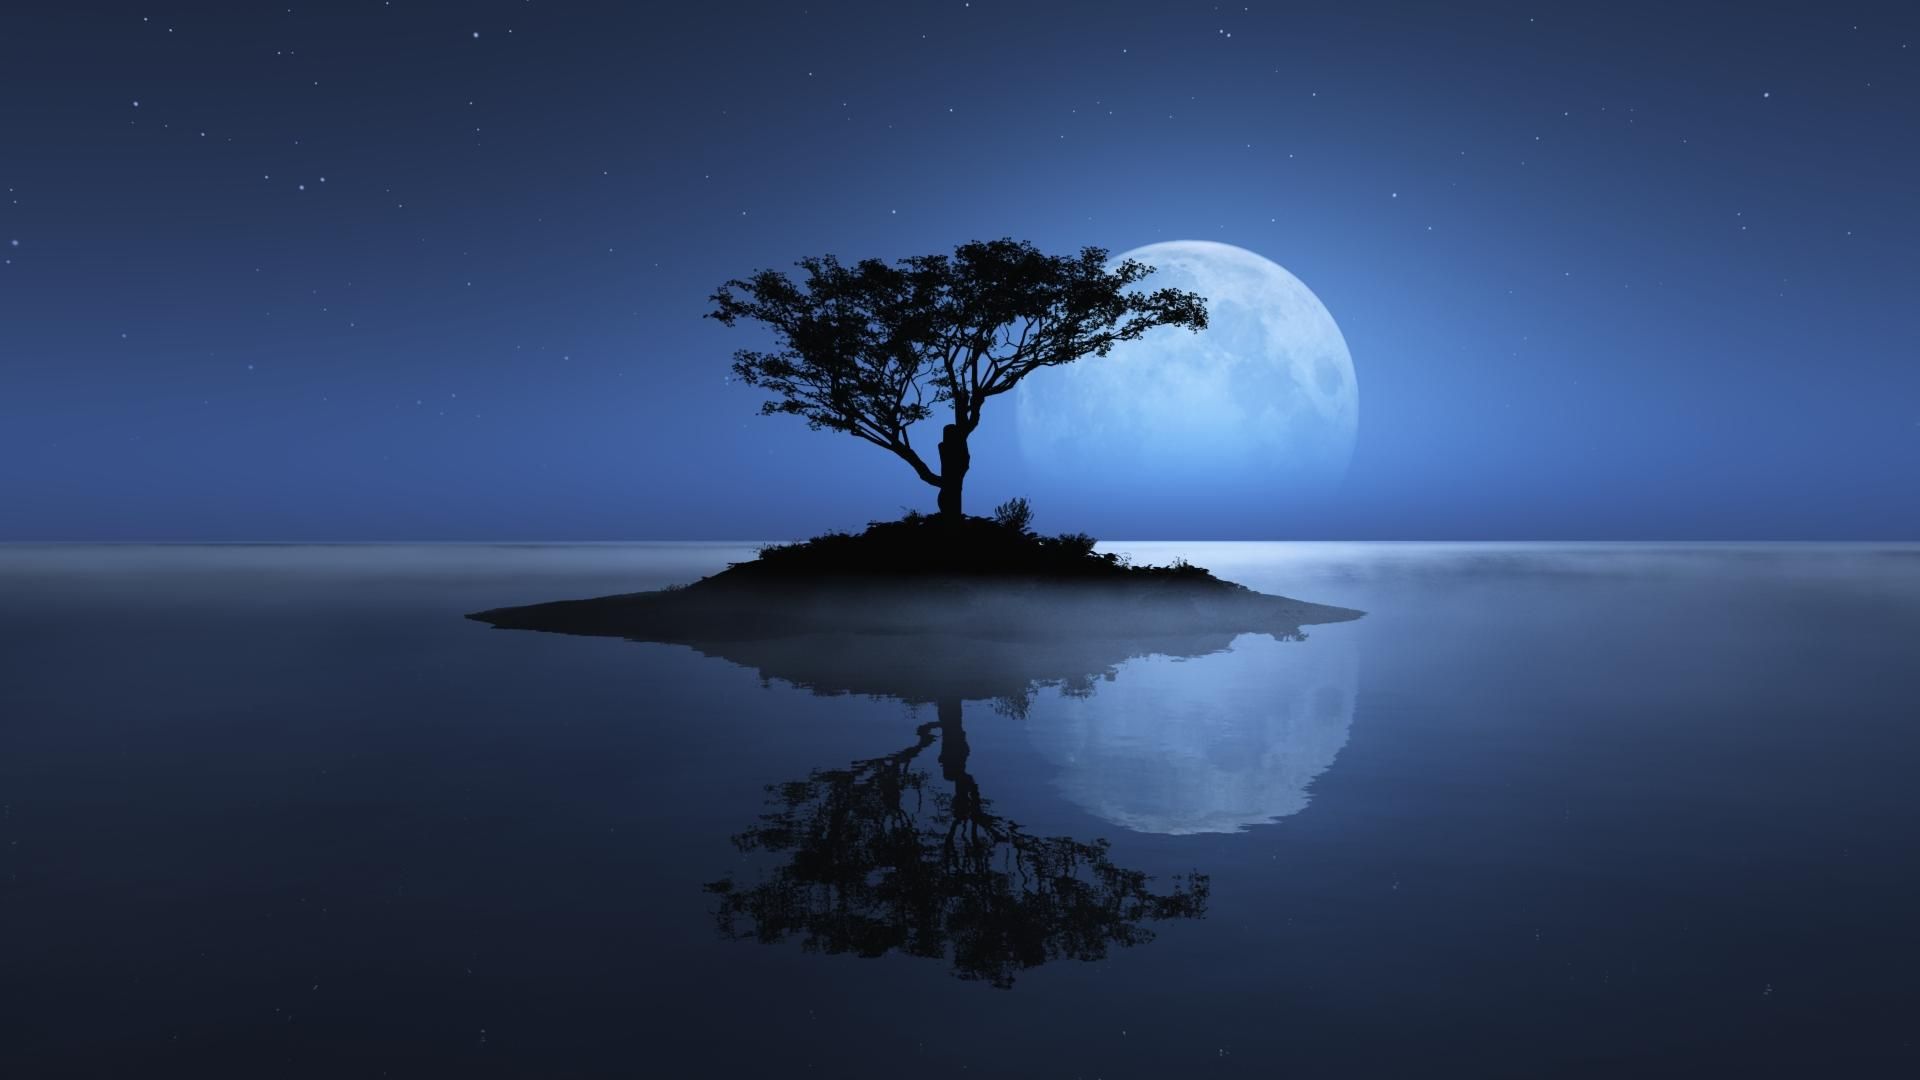 night moon wallpaper hd,nature,natural landscape,sky,tree,water resources